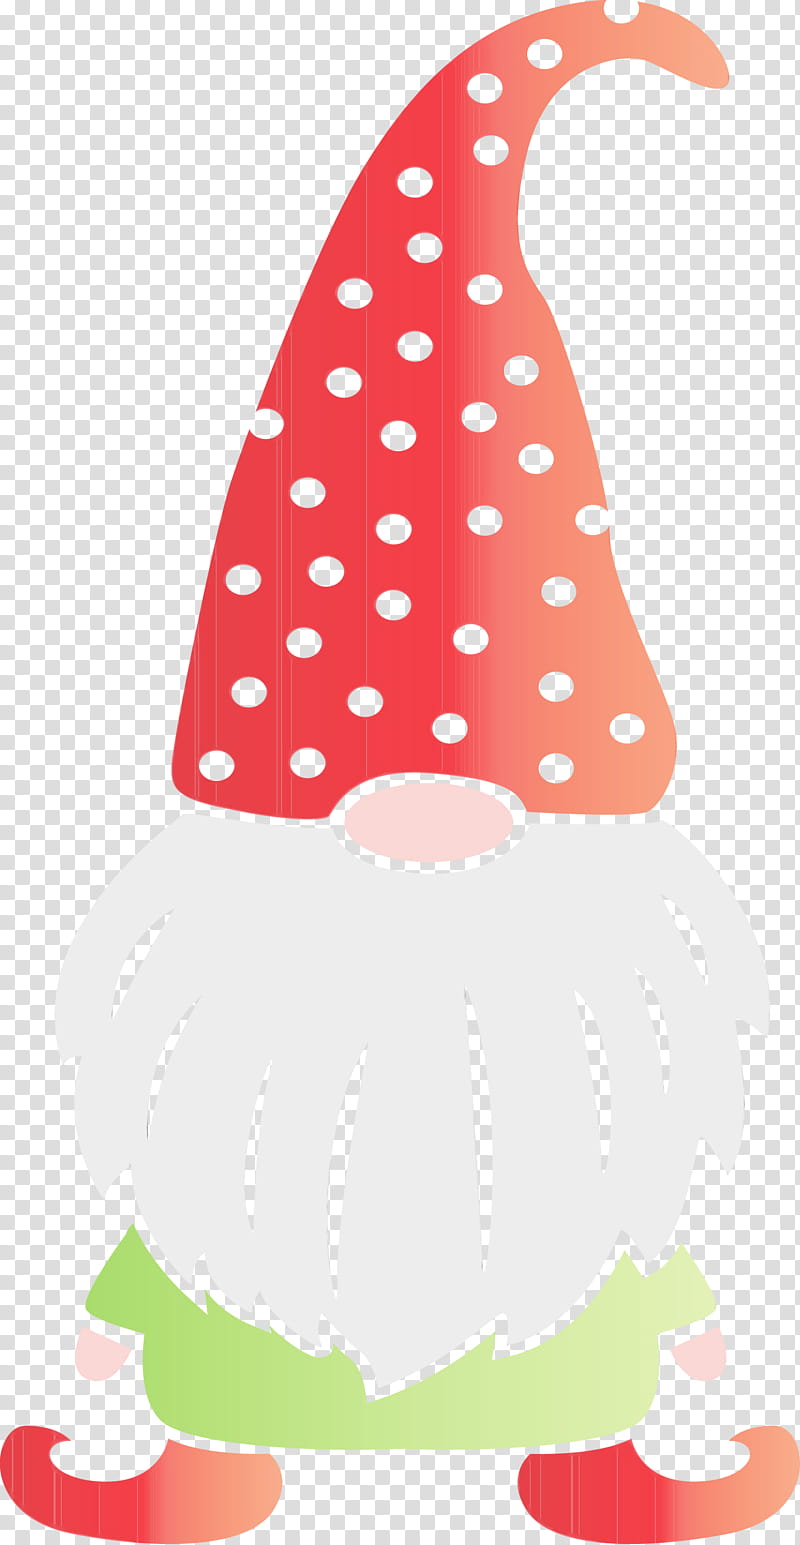 Polka dot, Gnome, Watercolor, Paint, Wet Ink, Pink, Mushroom, Party Hat transparent background PNG clipart